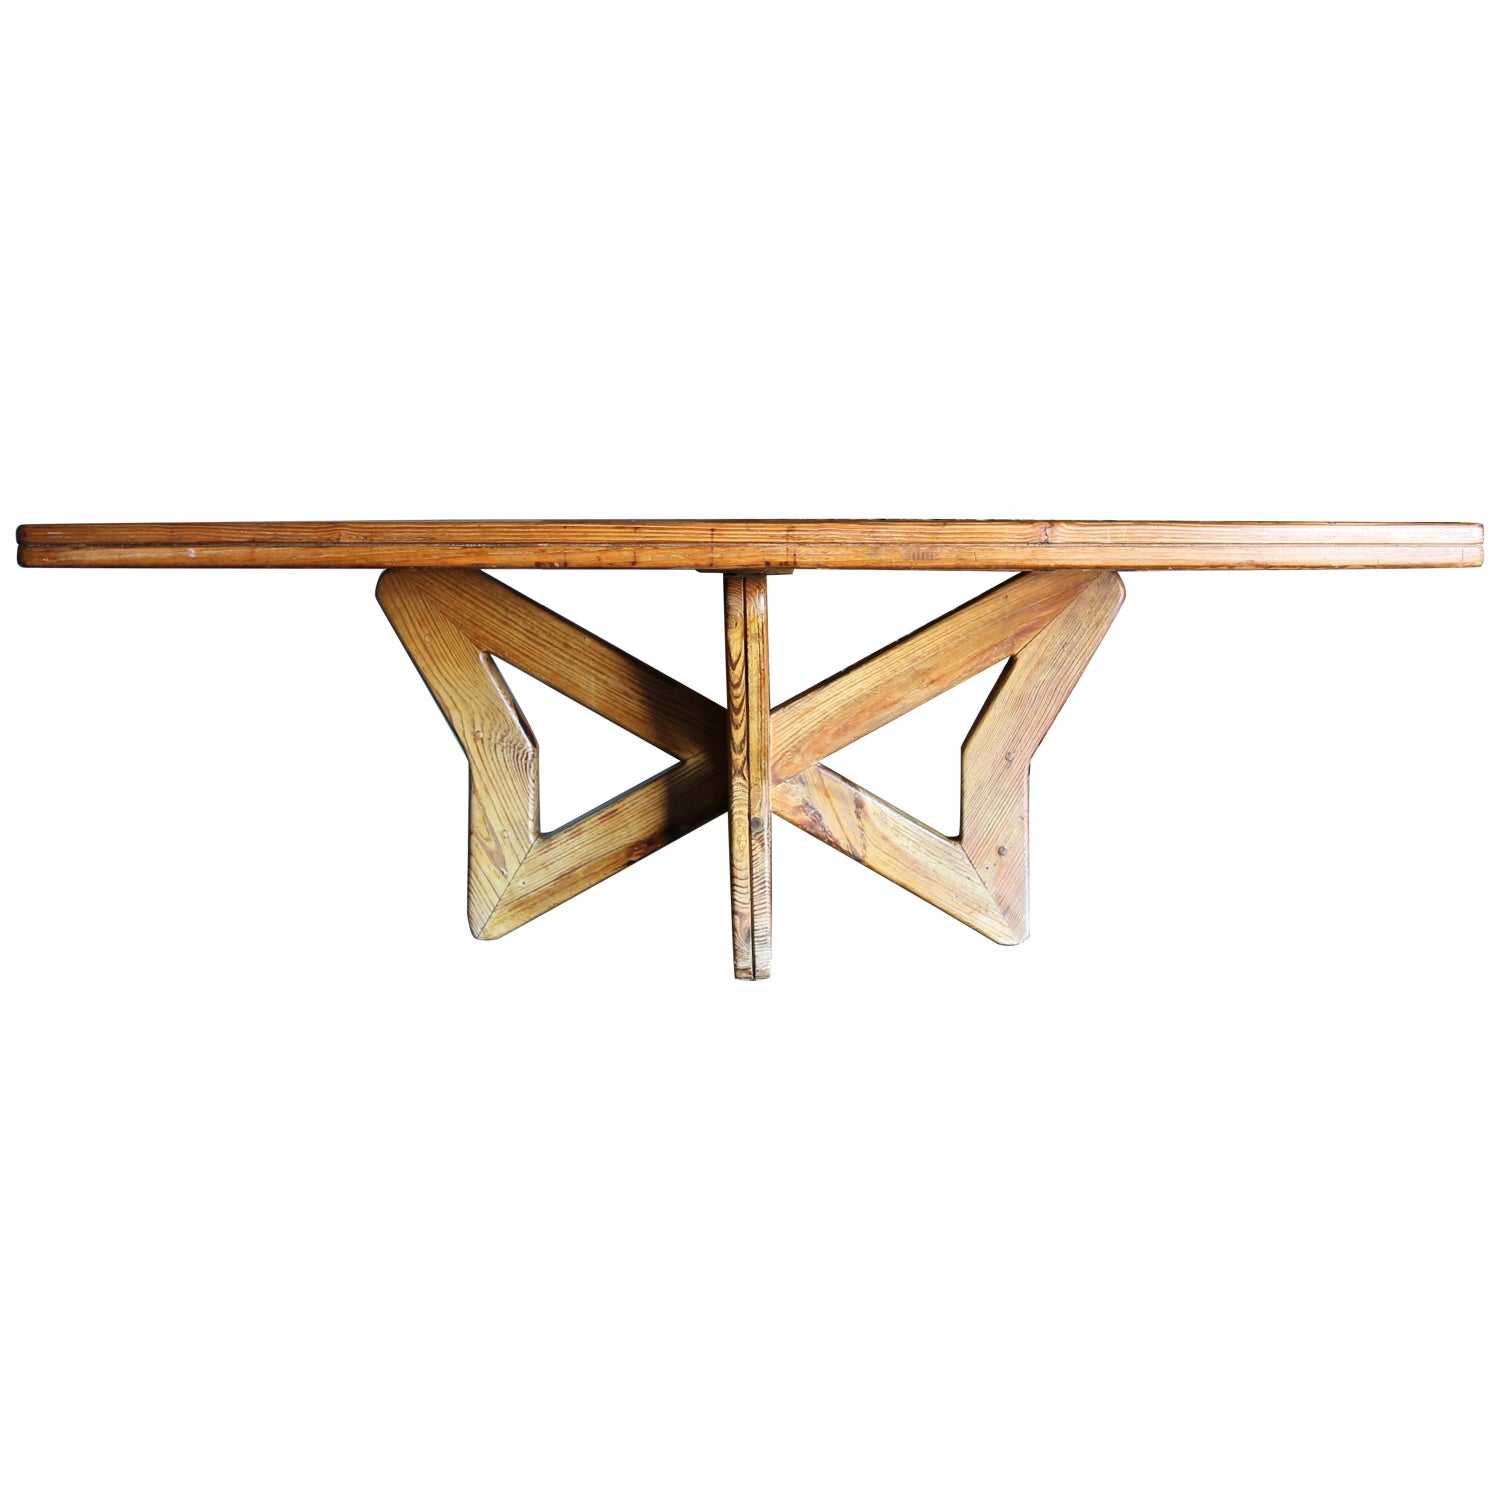 Lovö" Dining Table in Pine by Axel Einar Hjorth For Sale at 1stDibs